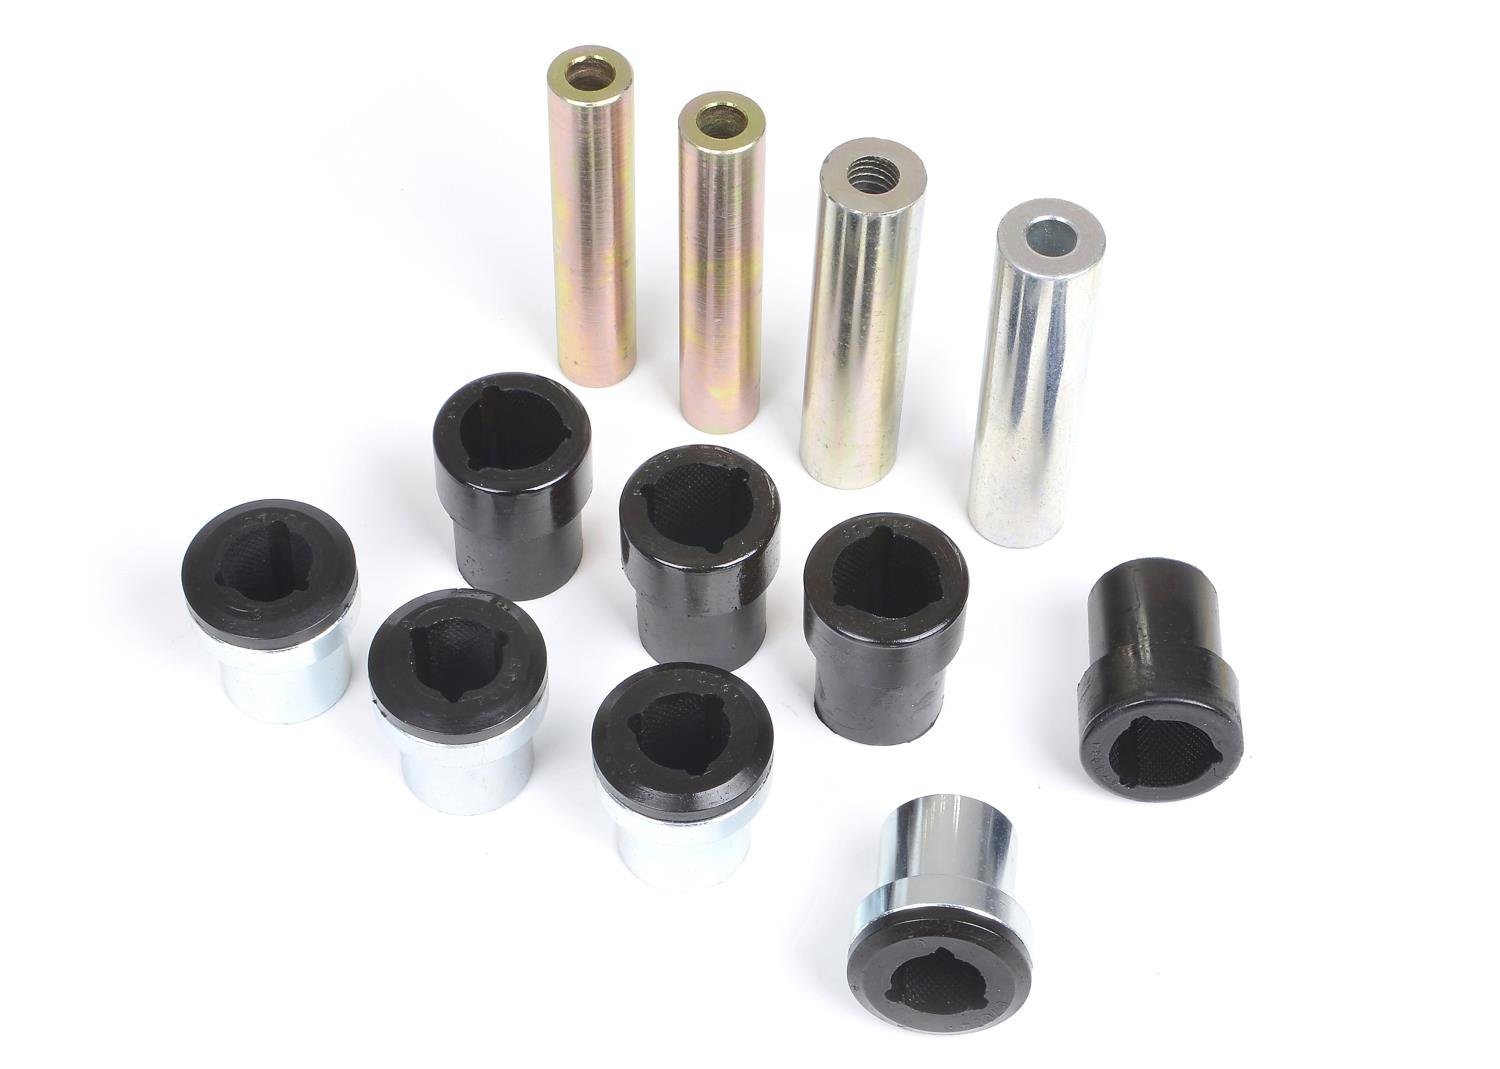 W51219A Front Upper Control Arm Bushing for 1989-1997 Nissan 300ZX, 1993-1997 Infiniti Q45, 1990-1993 Nissan Skyline